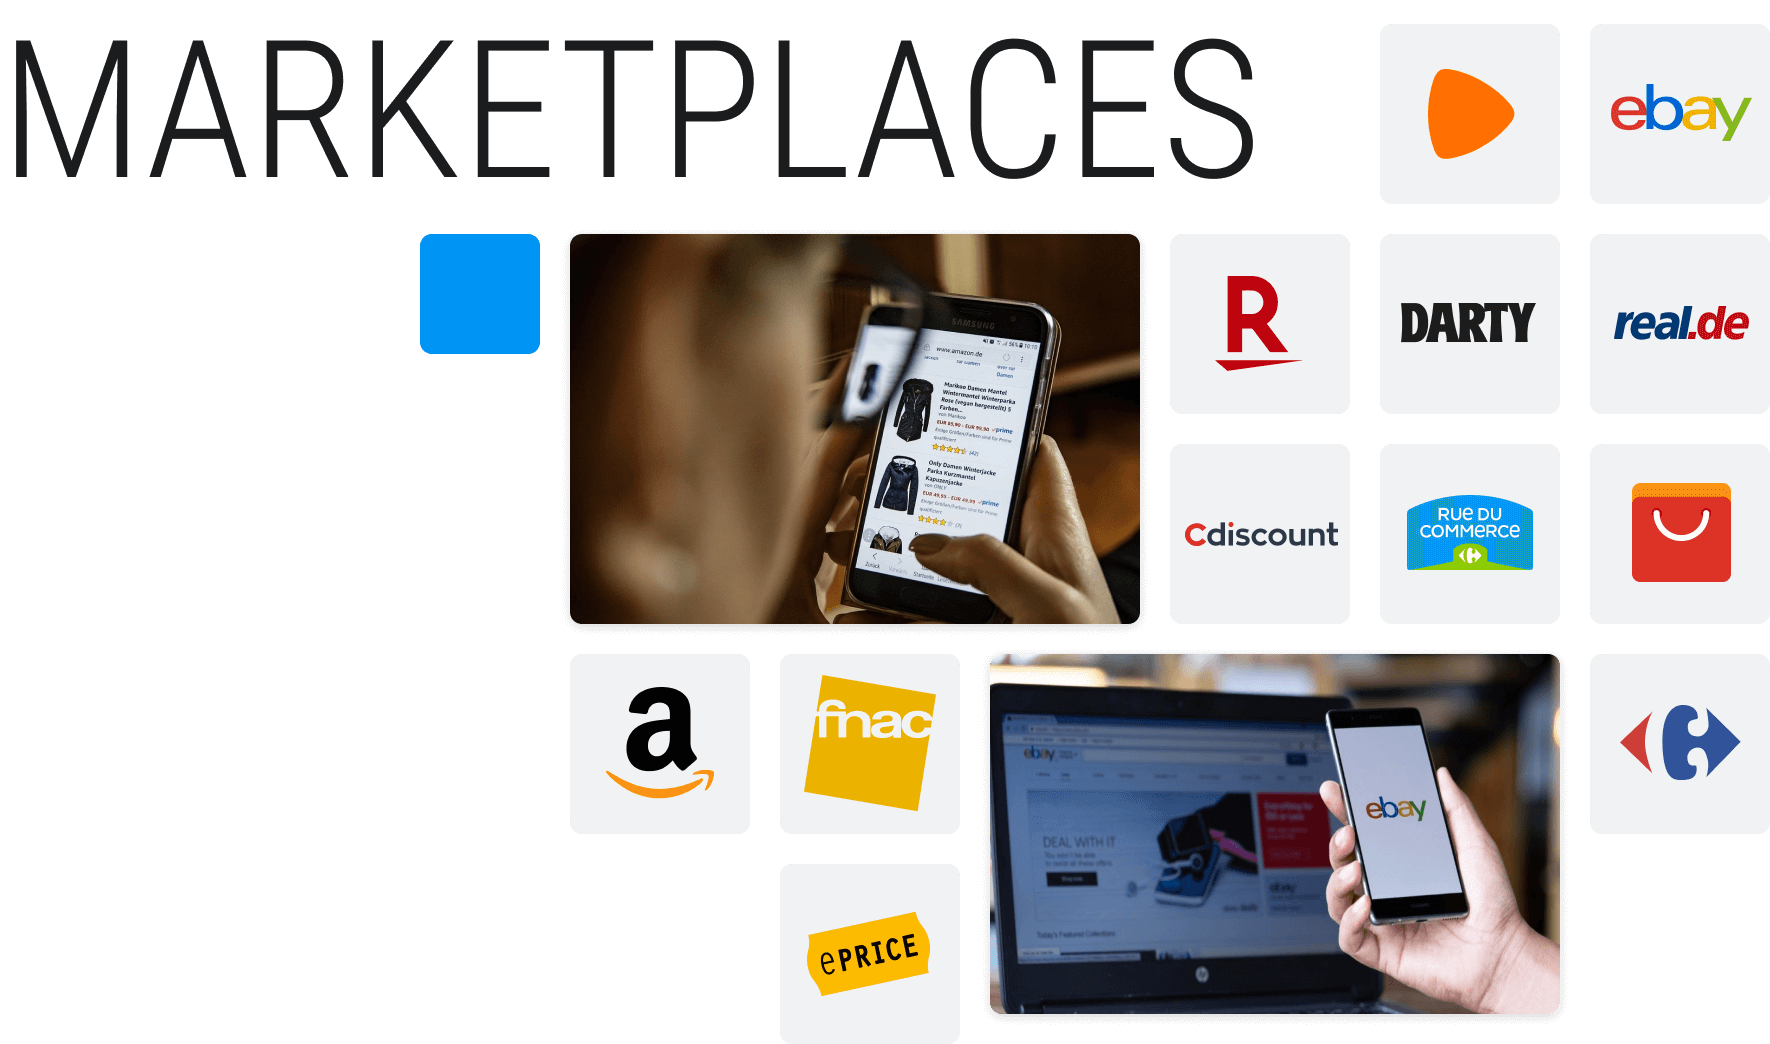 Marketplace solutions